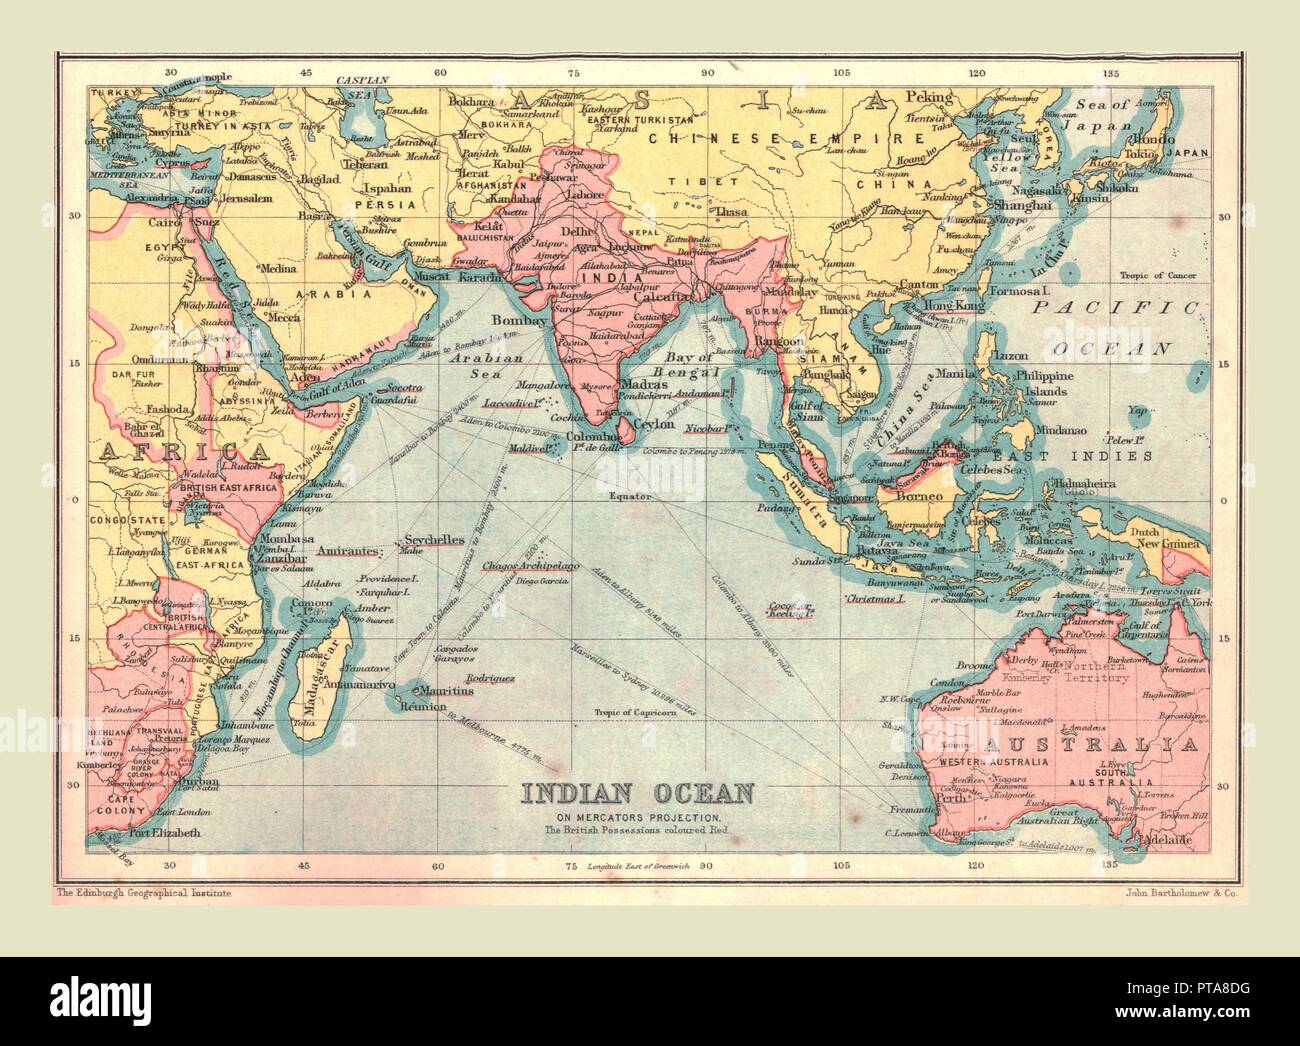 Map Of The Indian Ocean 1902 Showing The Coast Of East Africa Arabia The Indian Subcontinent 3313